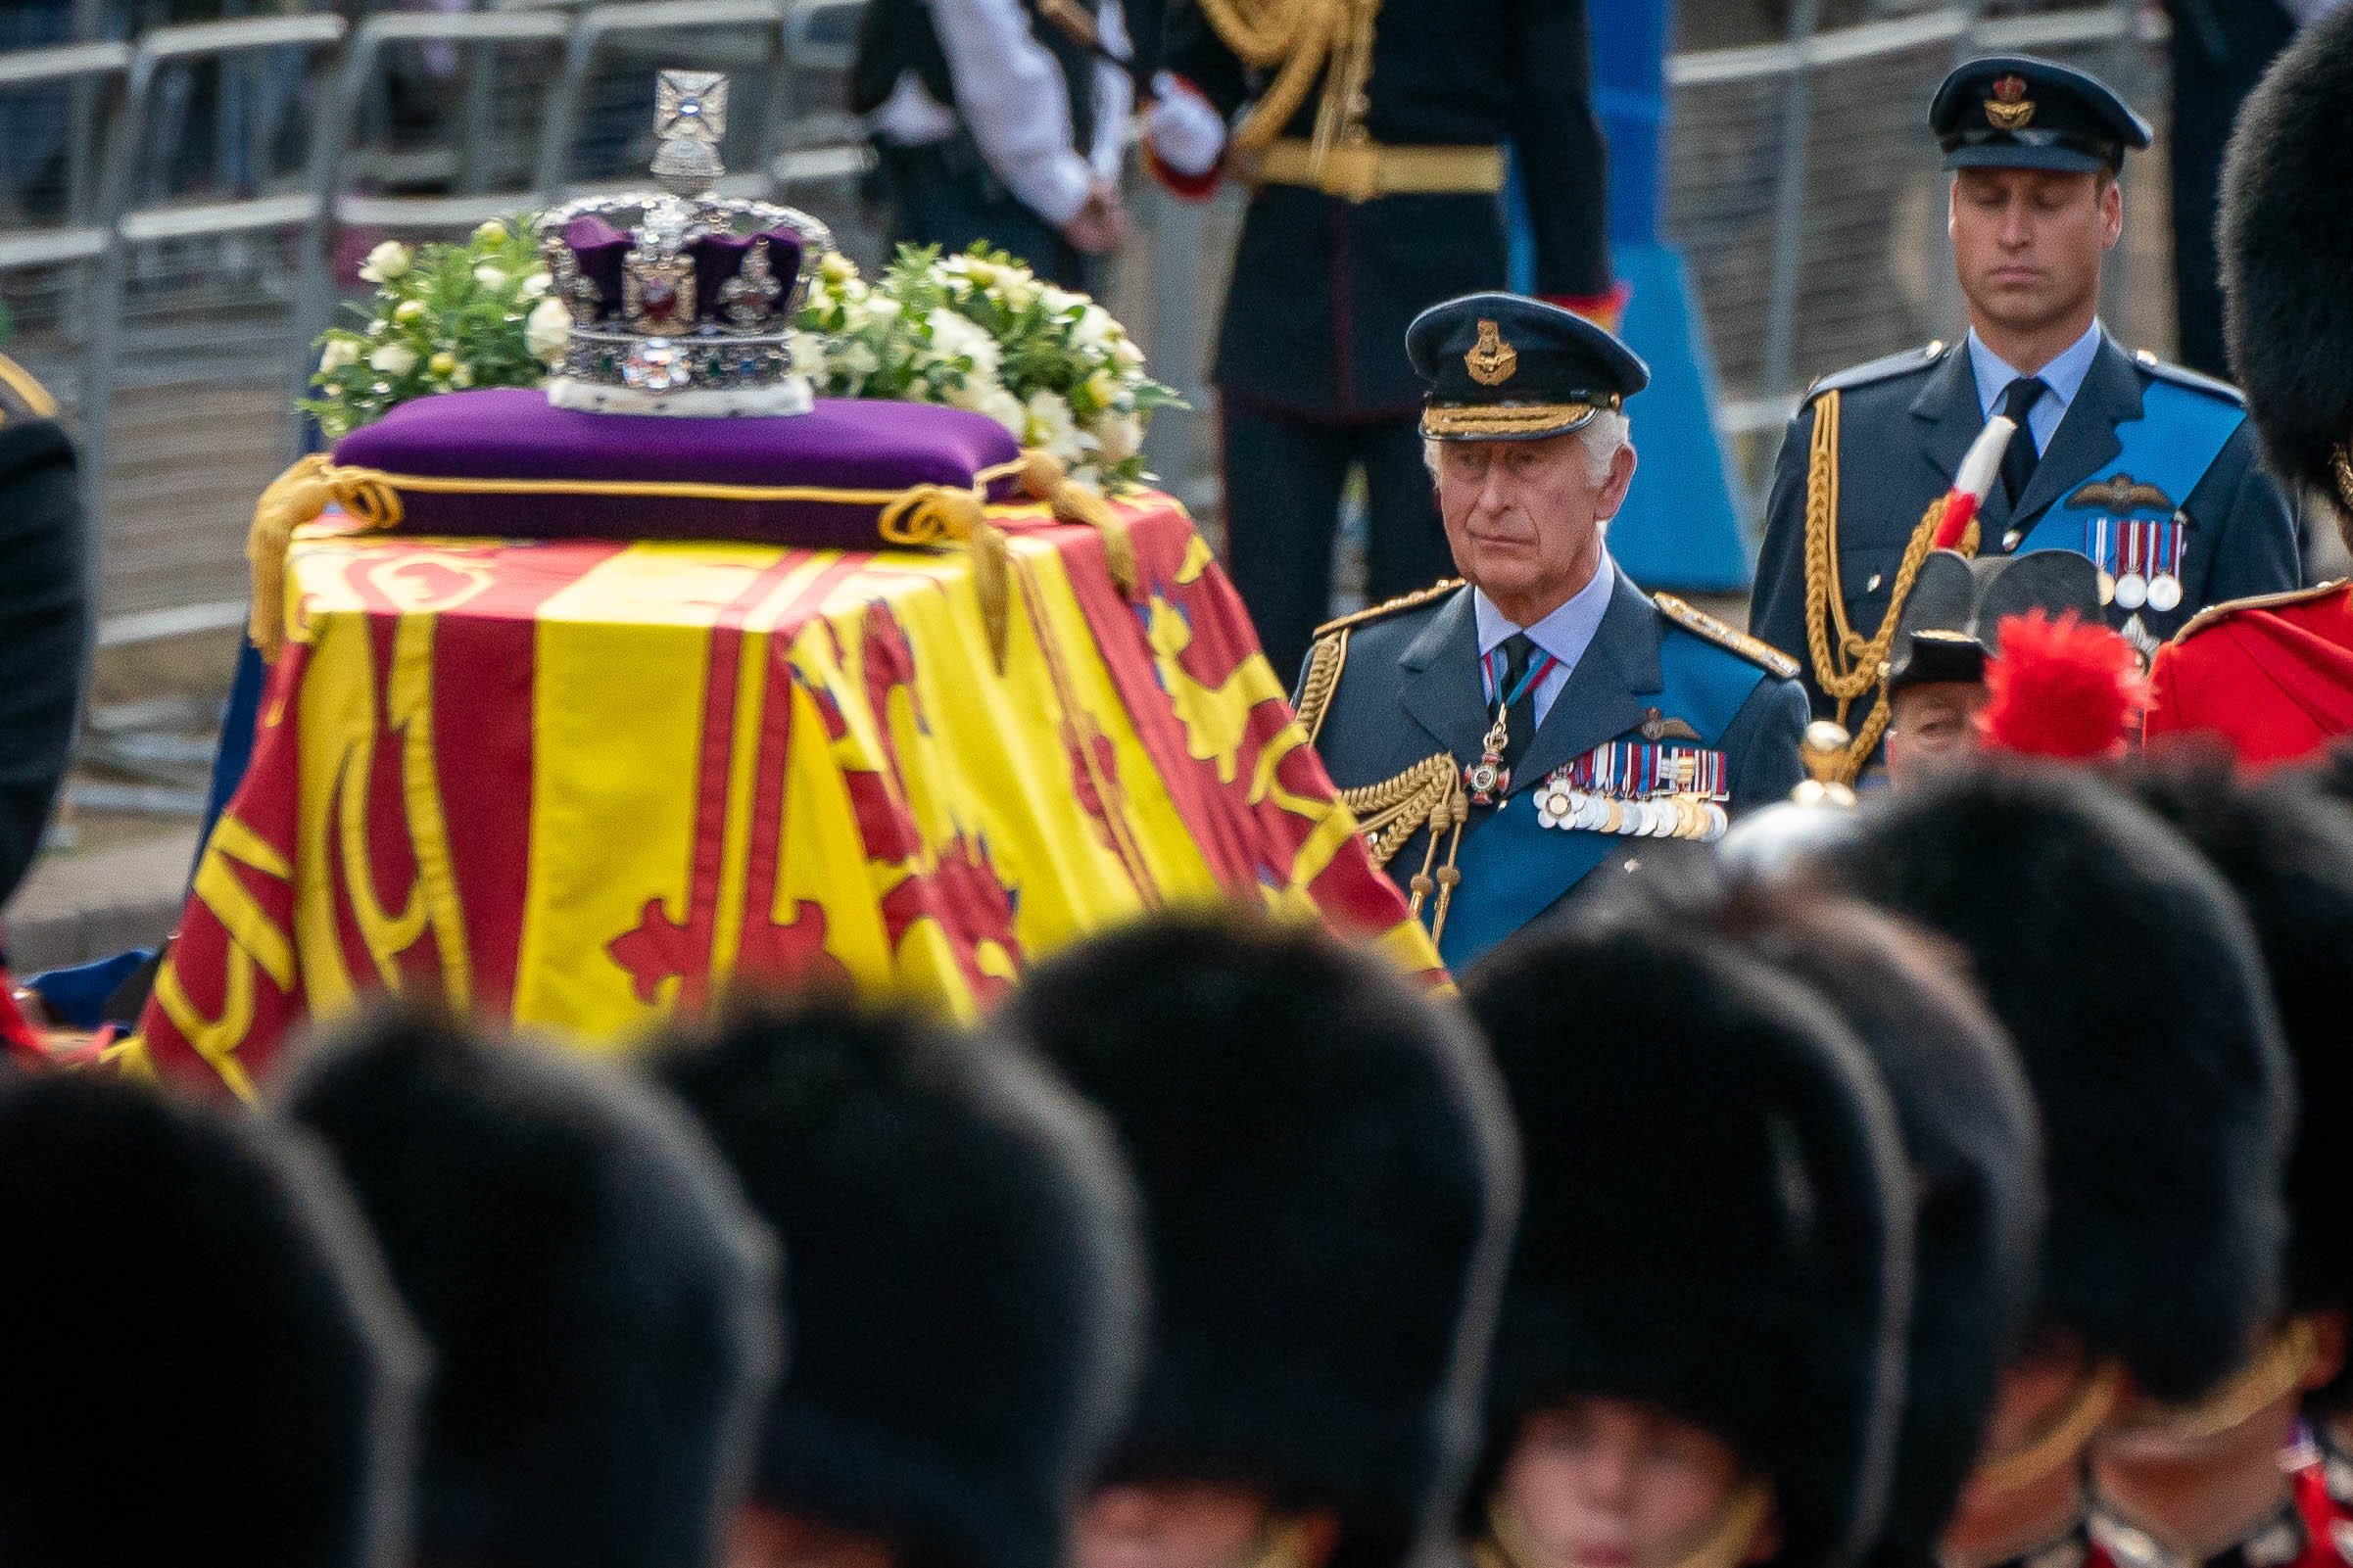 King Charles III and Prince William walk behind the coffin of Queen Elizabeth II